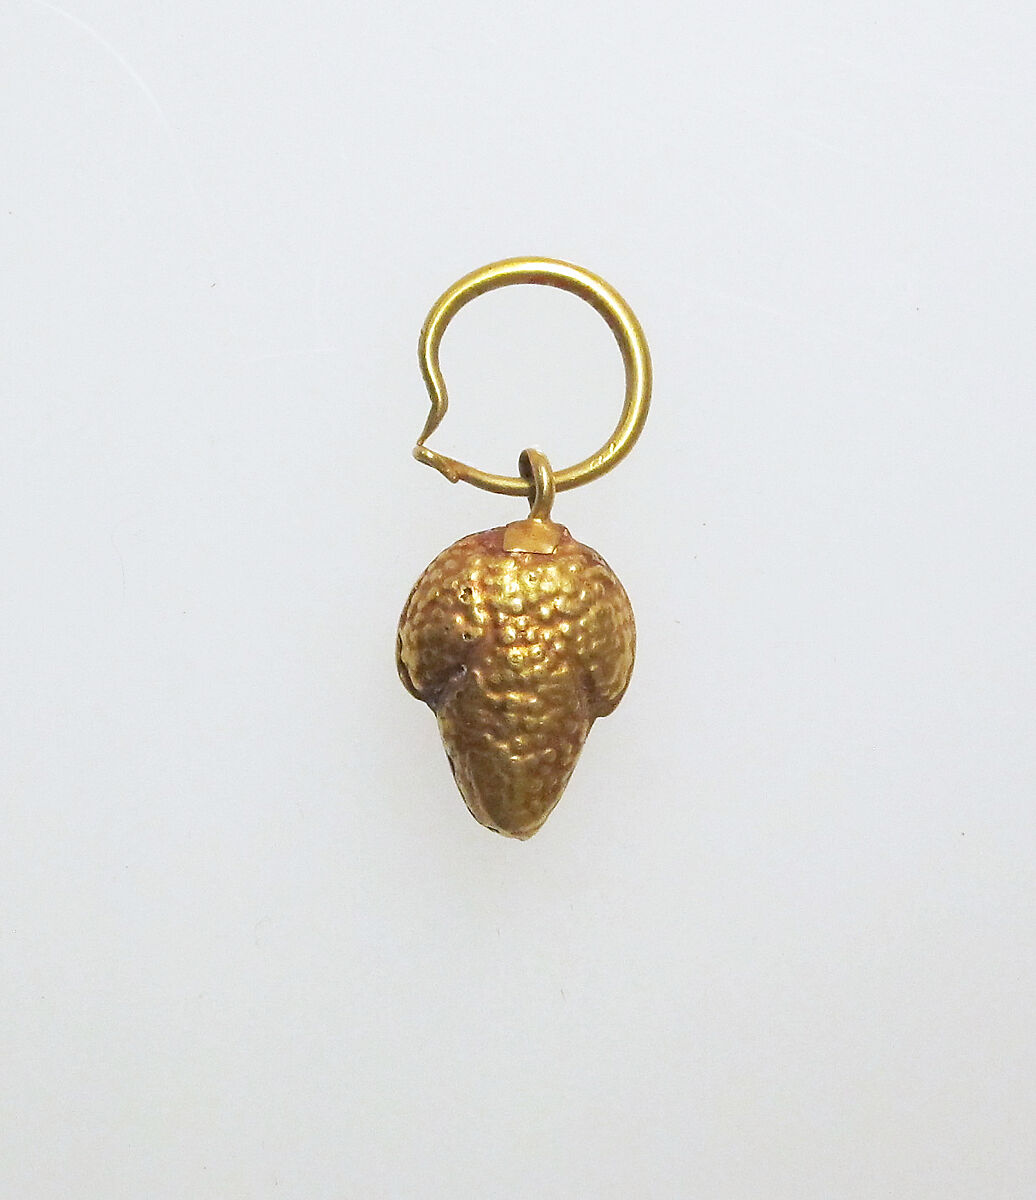 Earring with pendant of grapes, Gold, Greek or Roman 